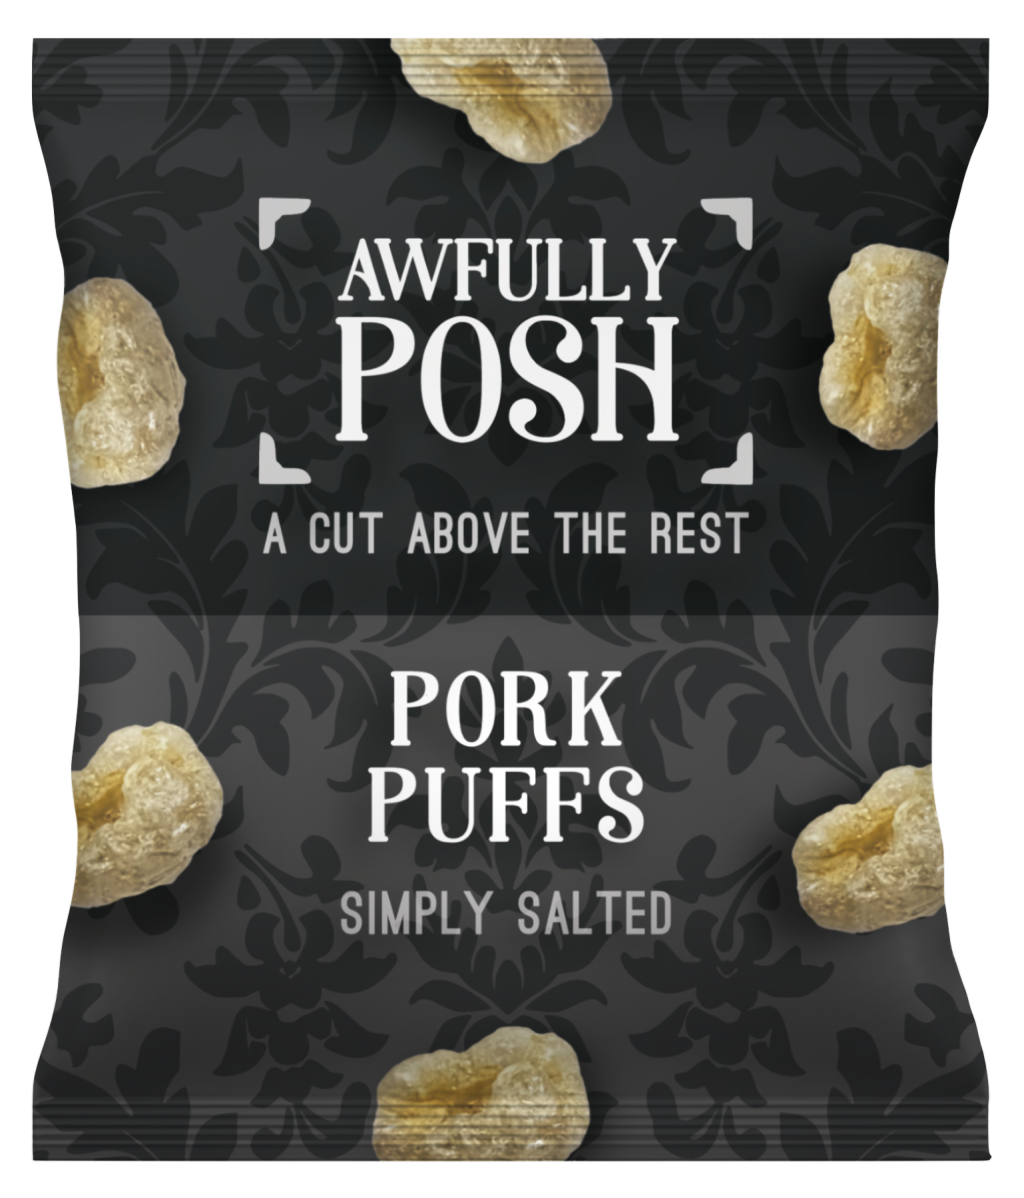 AWFULLY POSH Pork Puffs Simple Salted